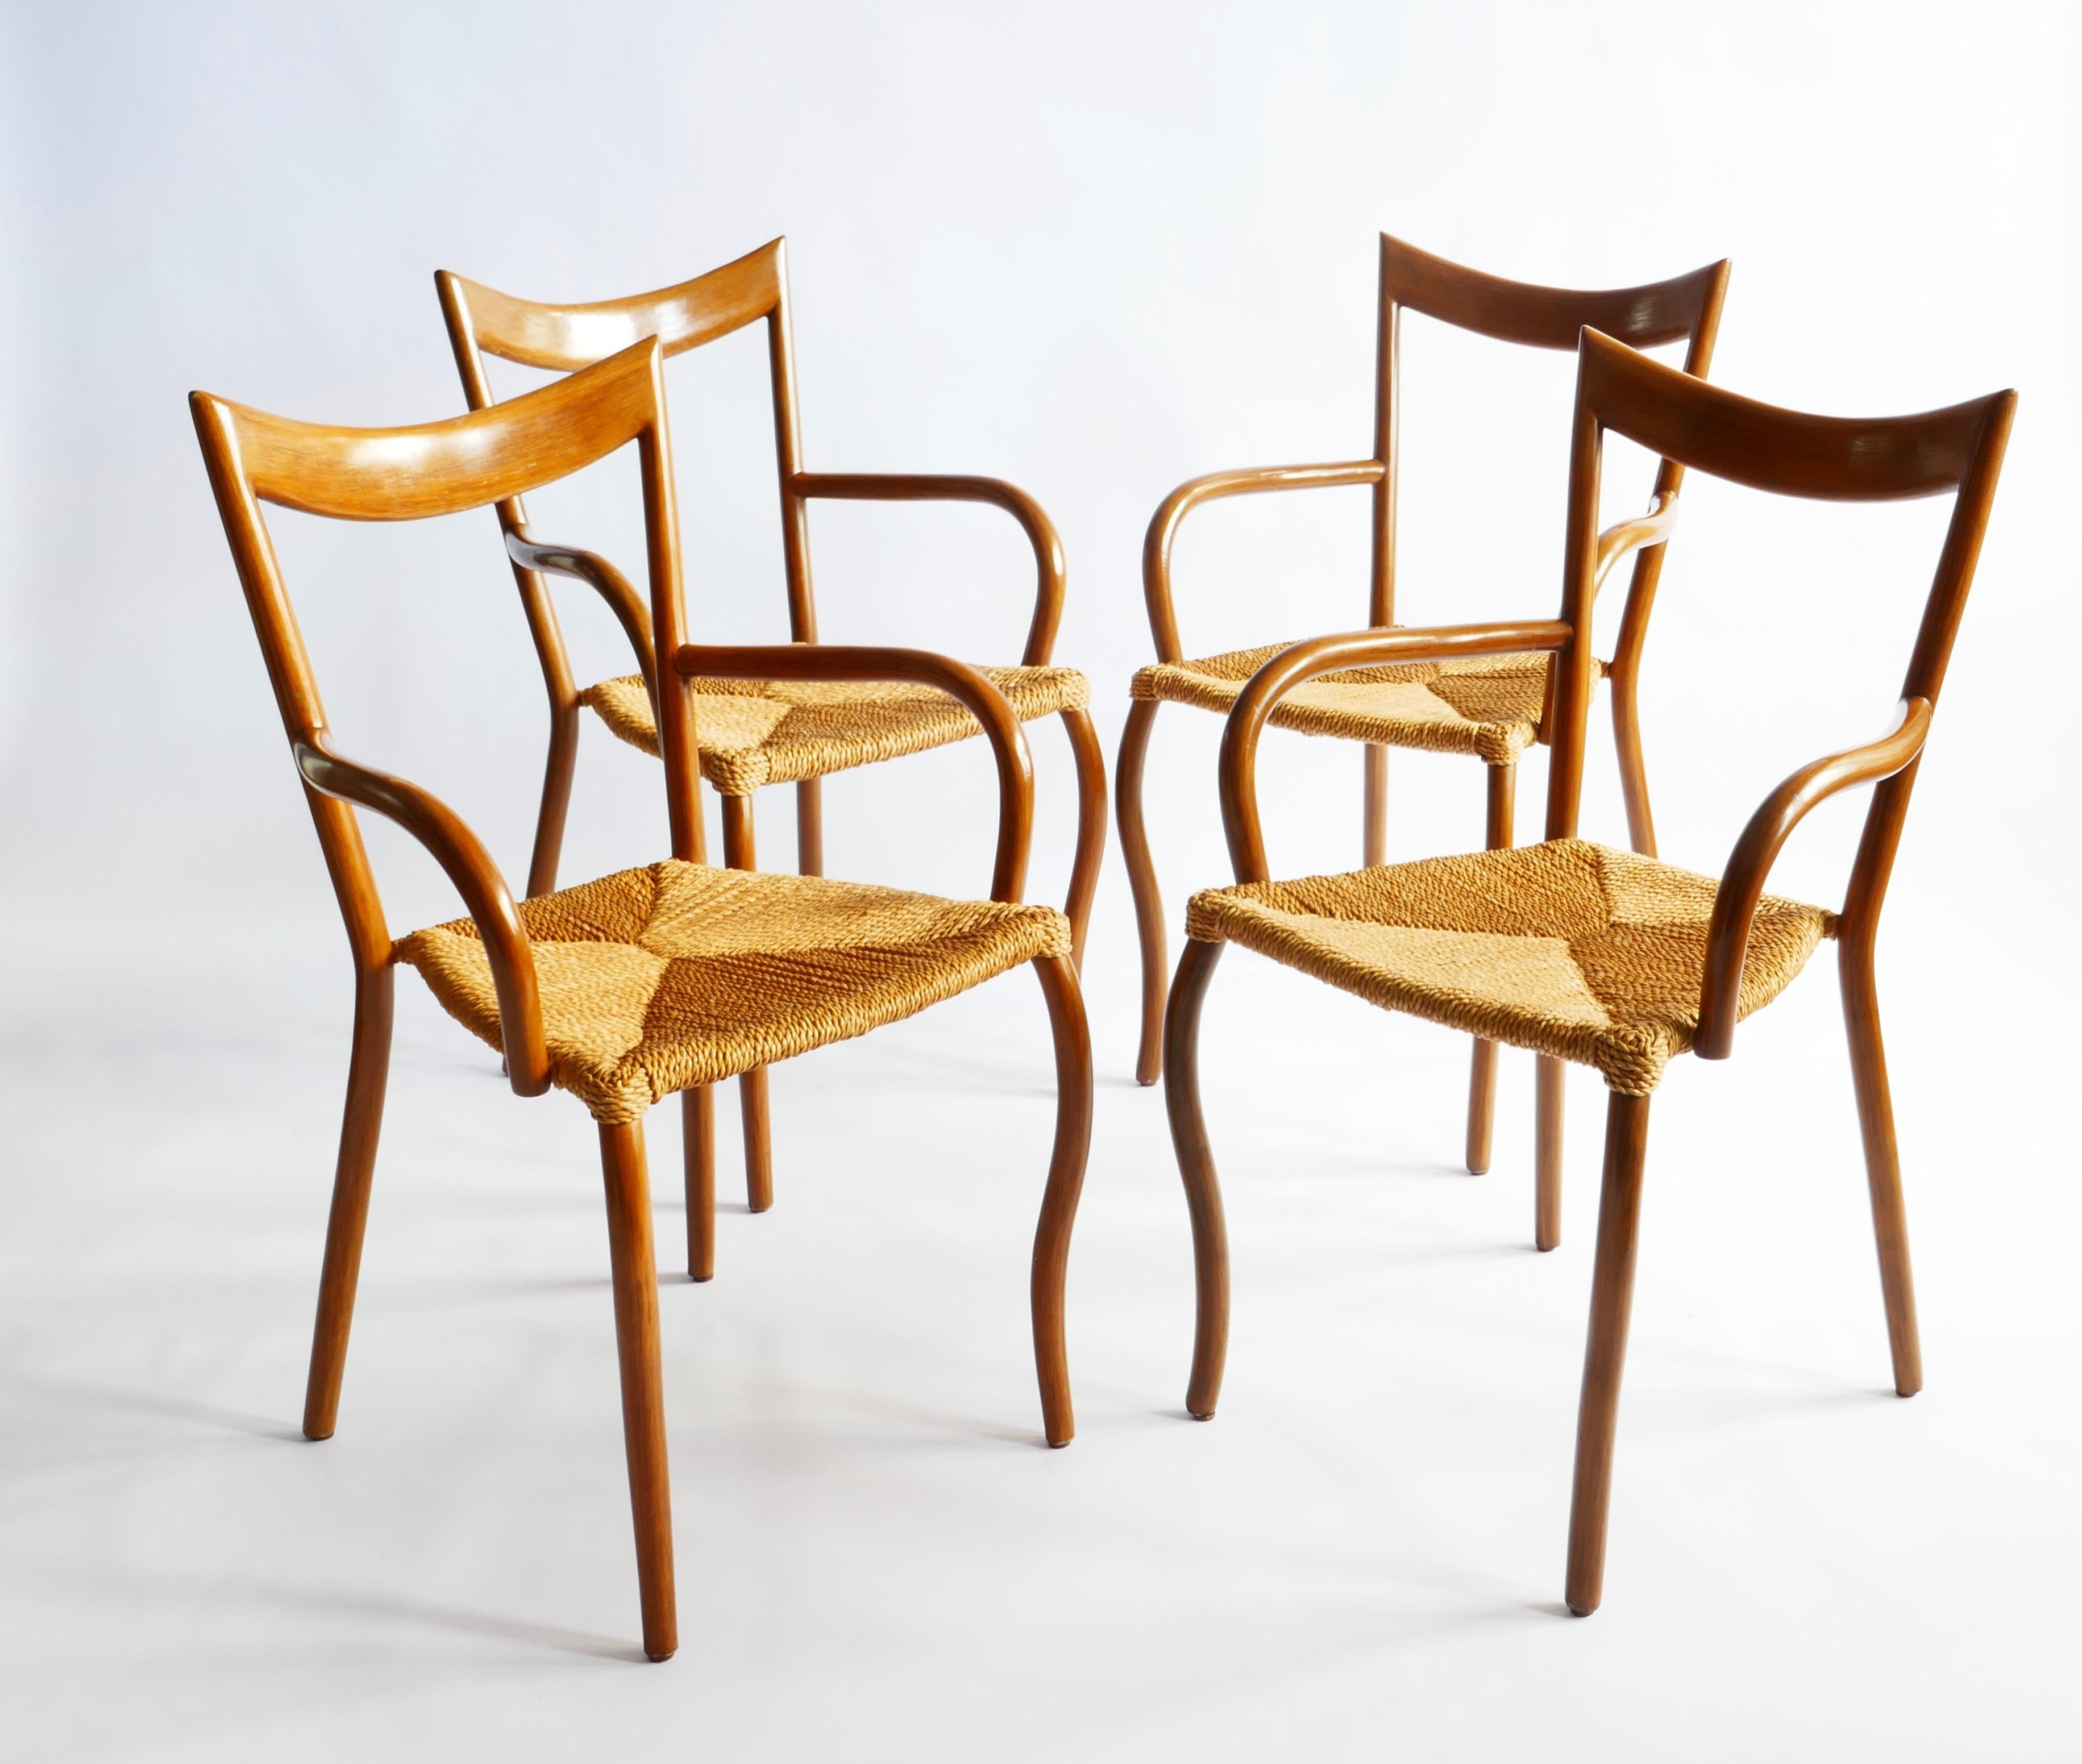 A set of four Manila arm chairs designed by Val Padilla for Jasper Conran.
A very light design for very strong chairs as the structure under the wood is in steel. Wood in walnut shade and seagrass seating. These chairs have won several design